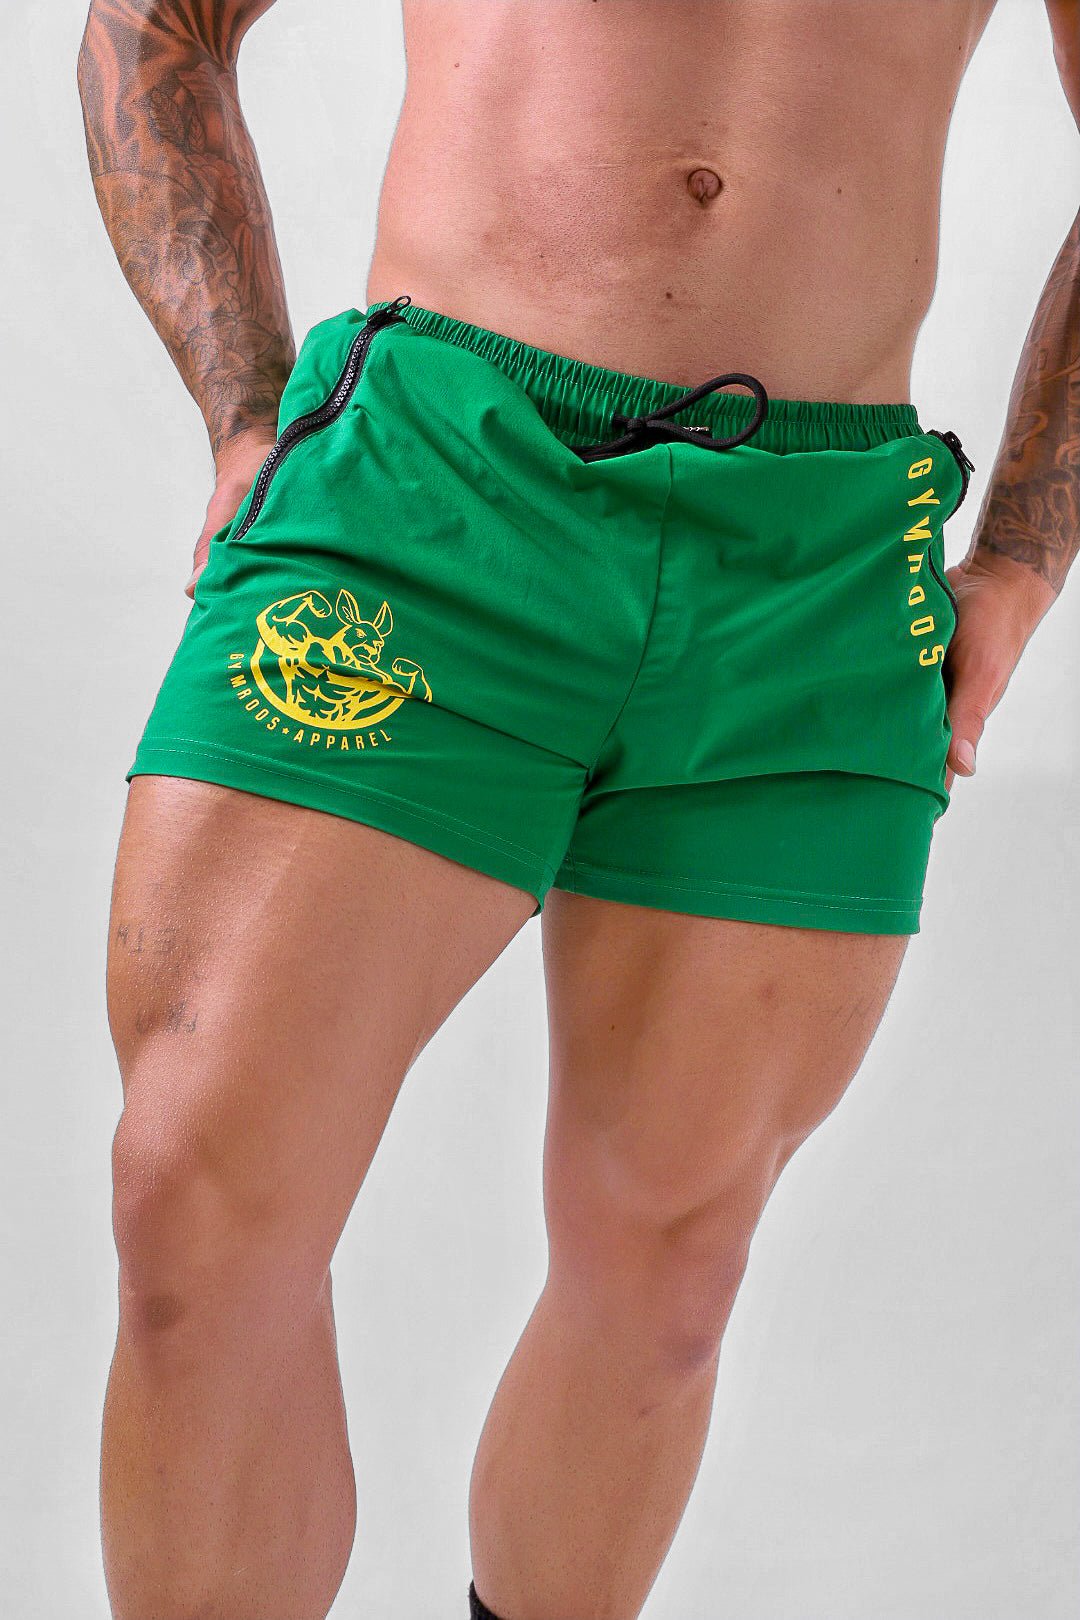 Roo Shorts - Green & Gold - GYMROOS